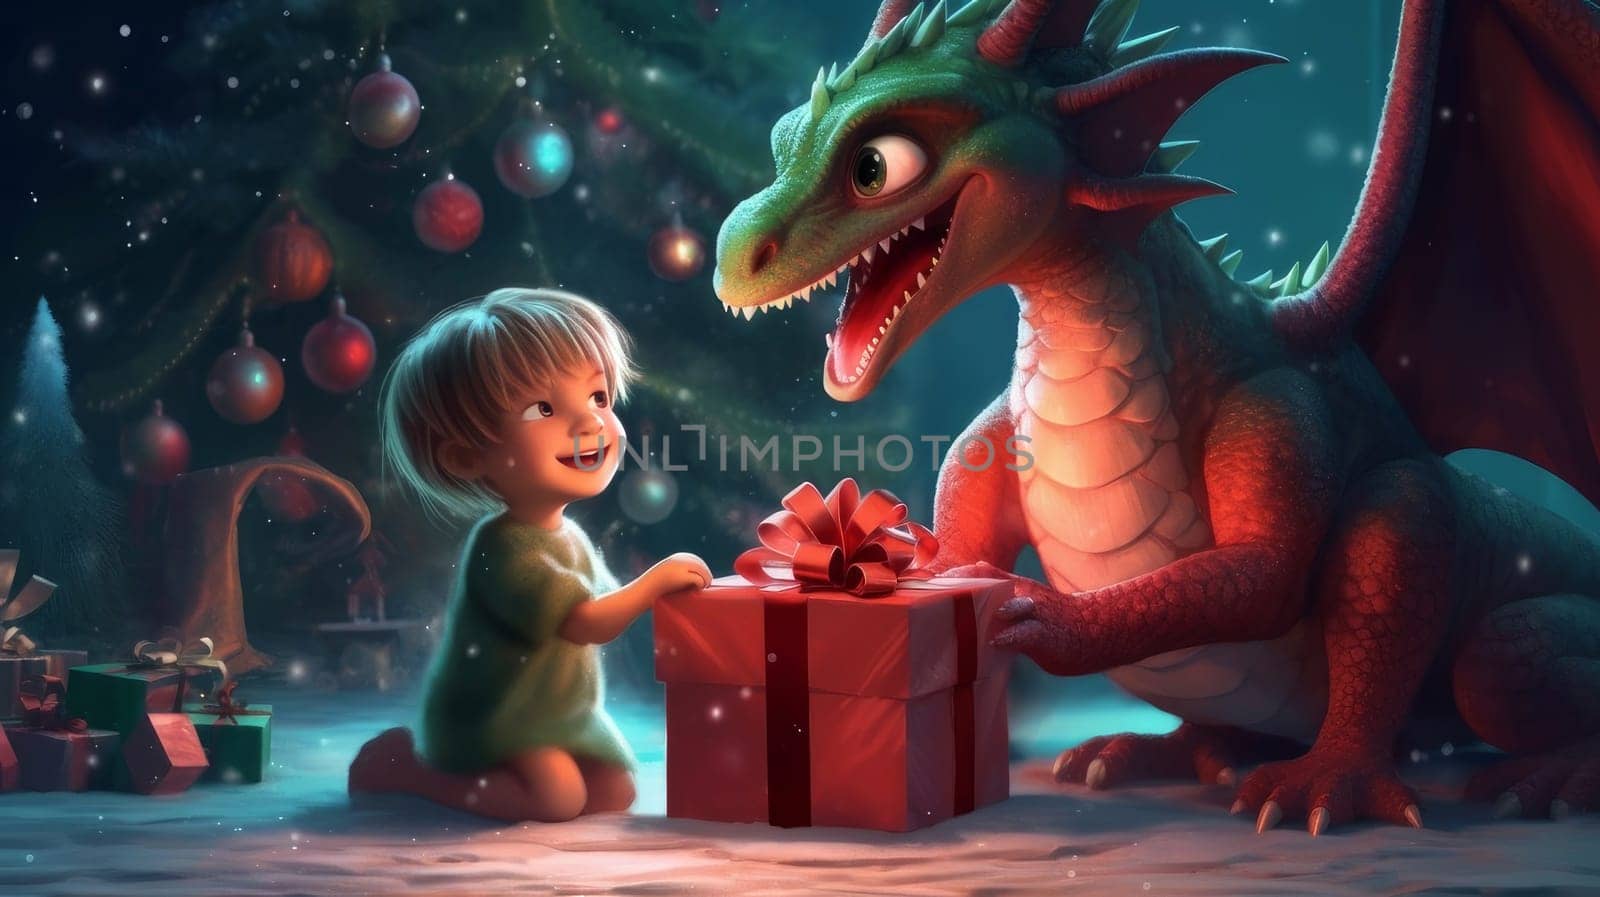 The dragon is a symbol of the new year according to the eastern calendar and a small child is together near the New Year tree with Christmas gifts and lights. AI generated